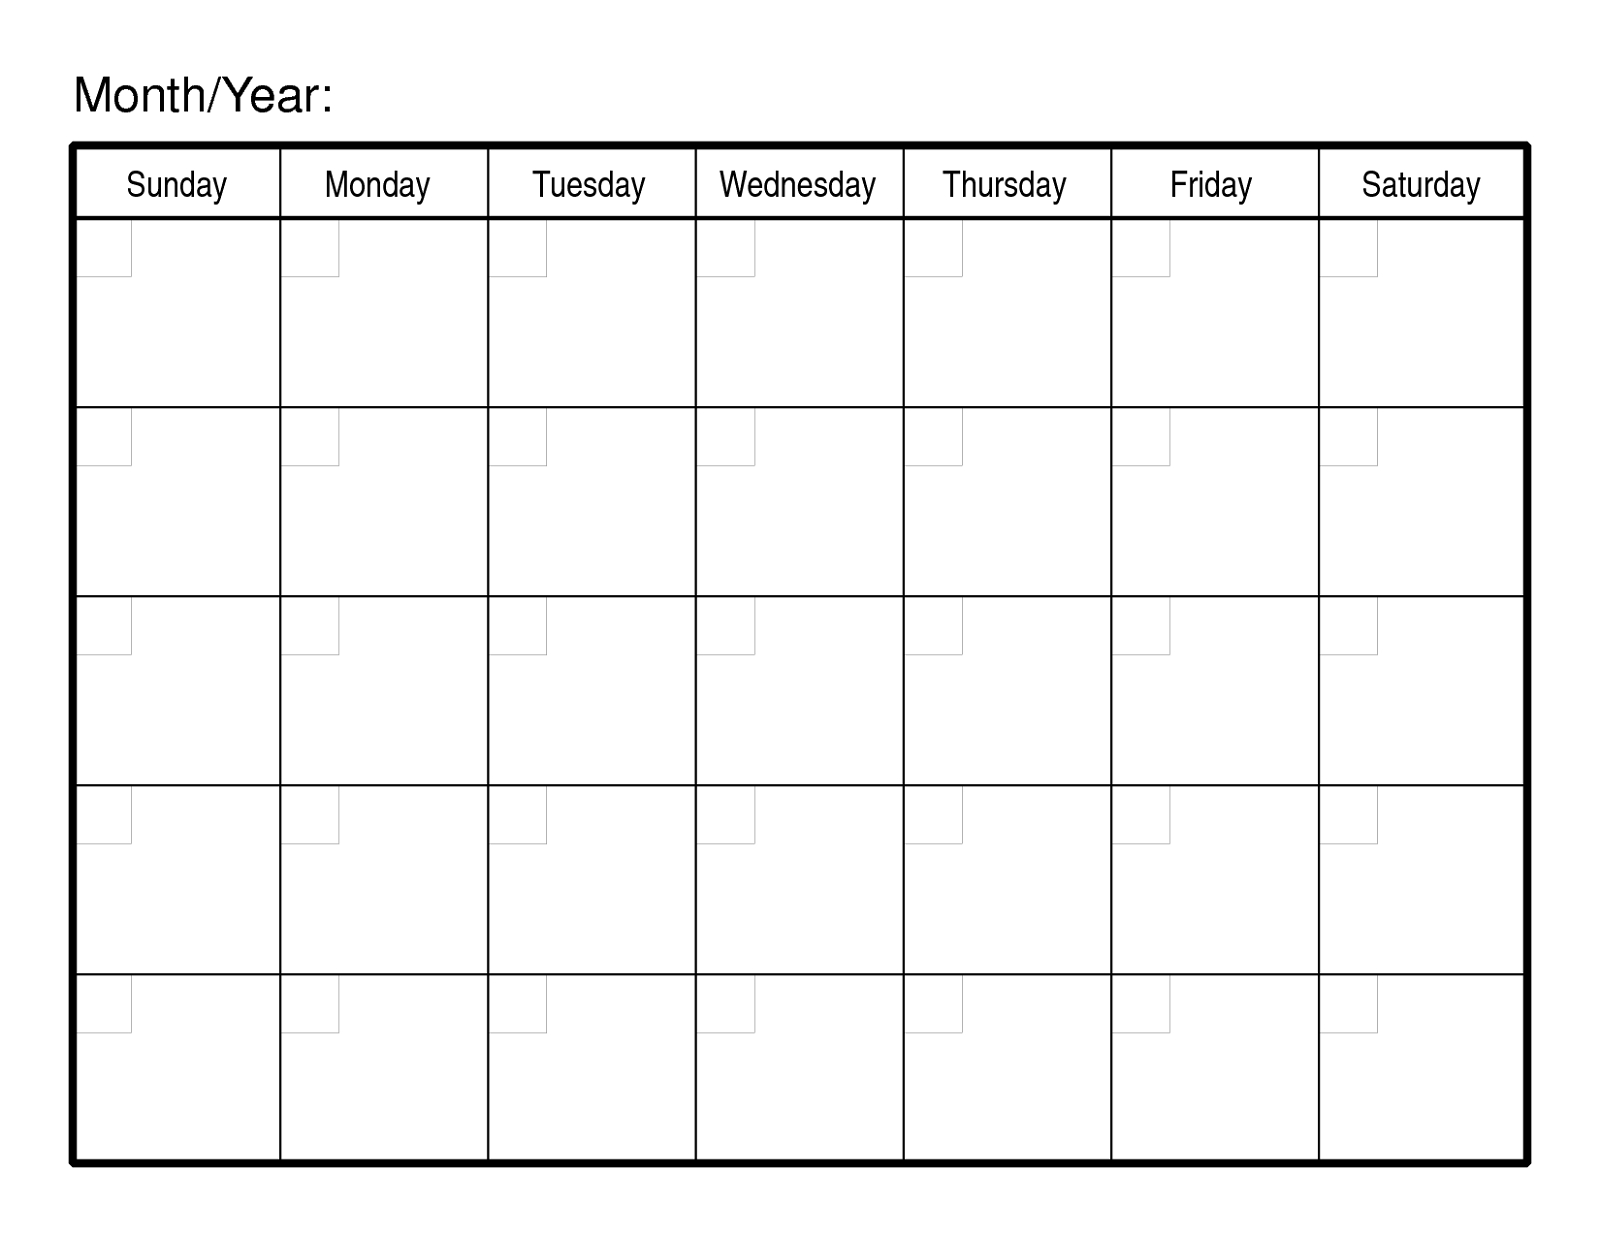 Sample Calendars To Print | Activity Shelter